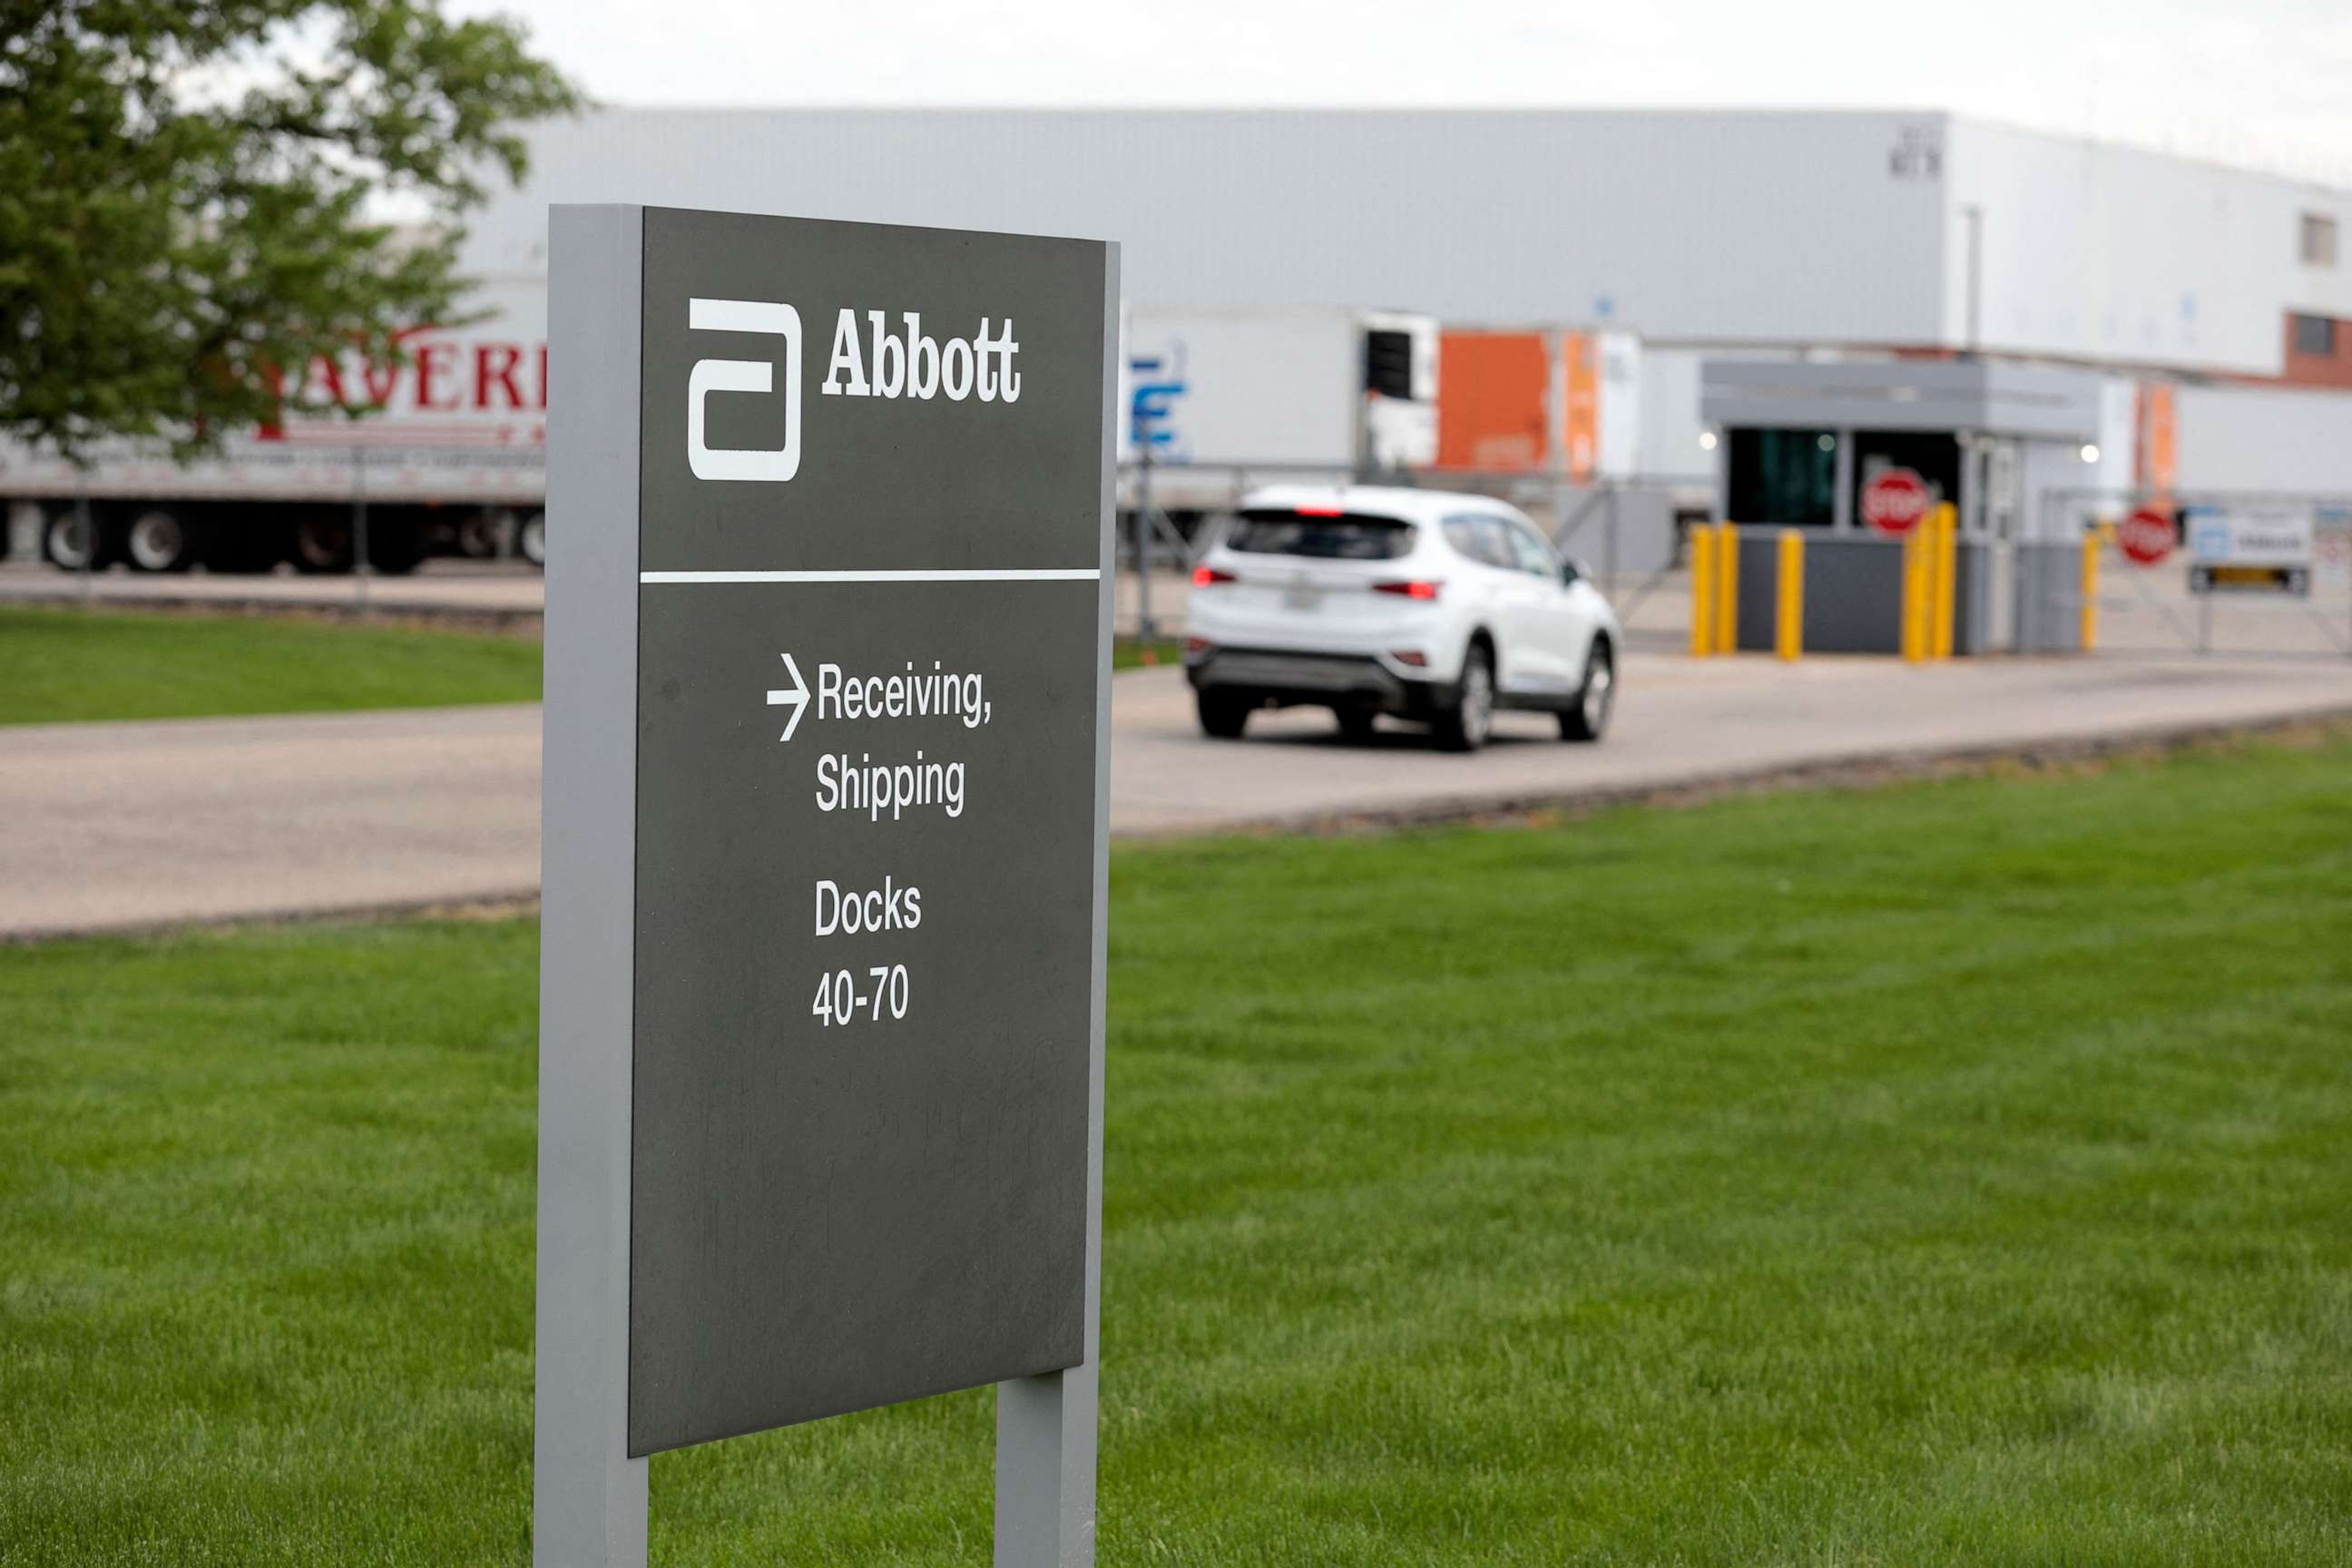 PHOTO: The Abbott manufacturing facility is shown in Sturgis, Michigan, on May 13, 2022.